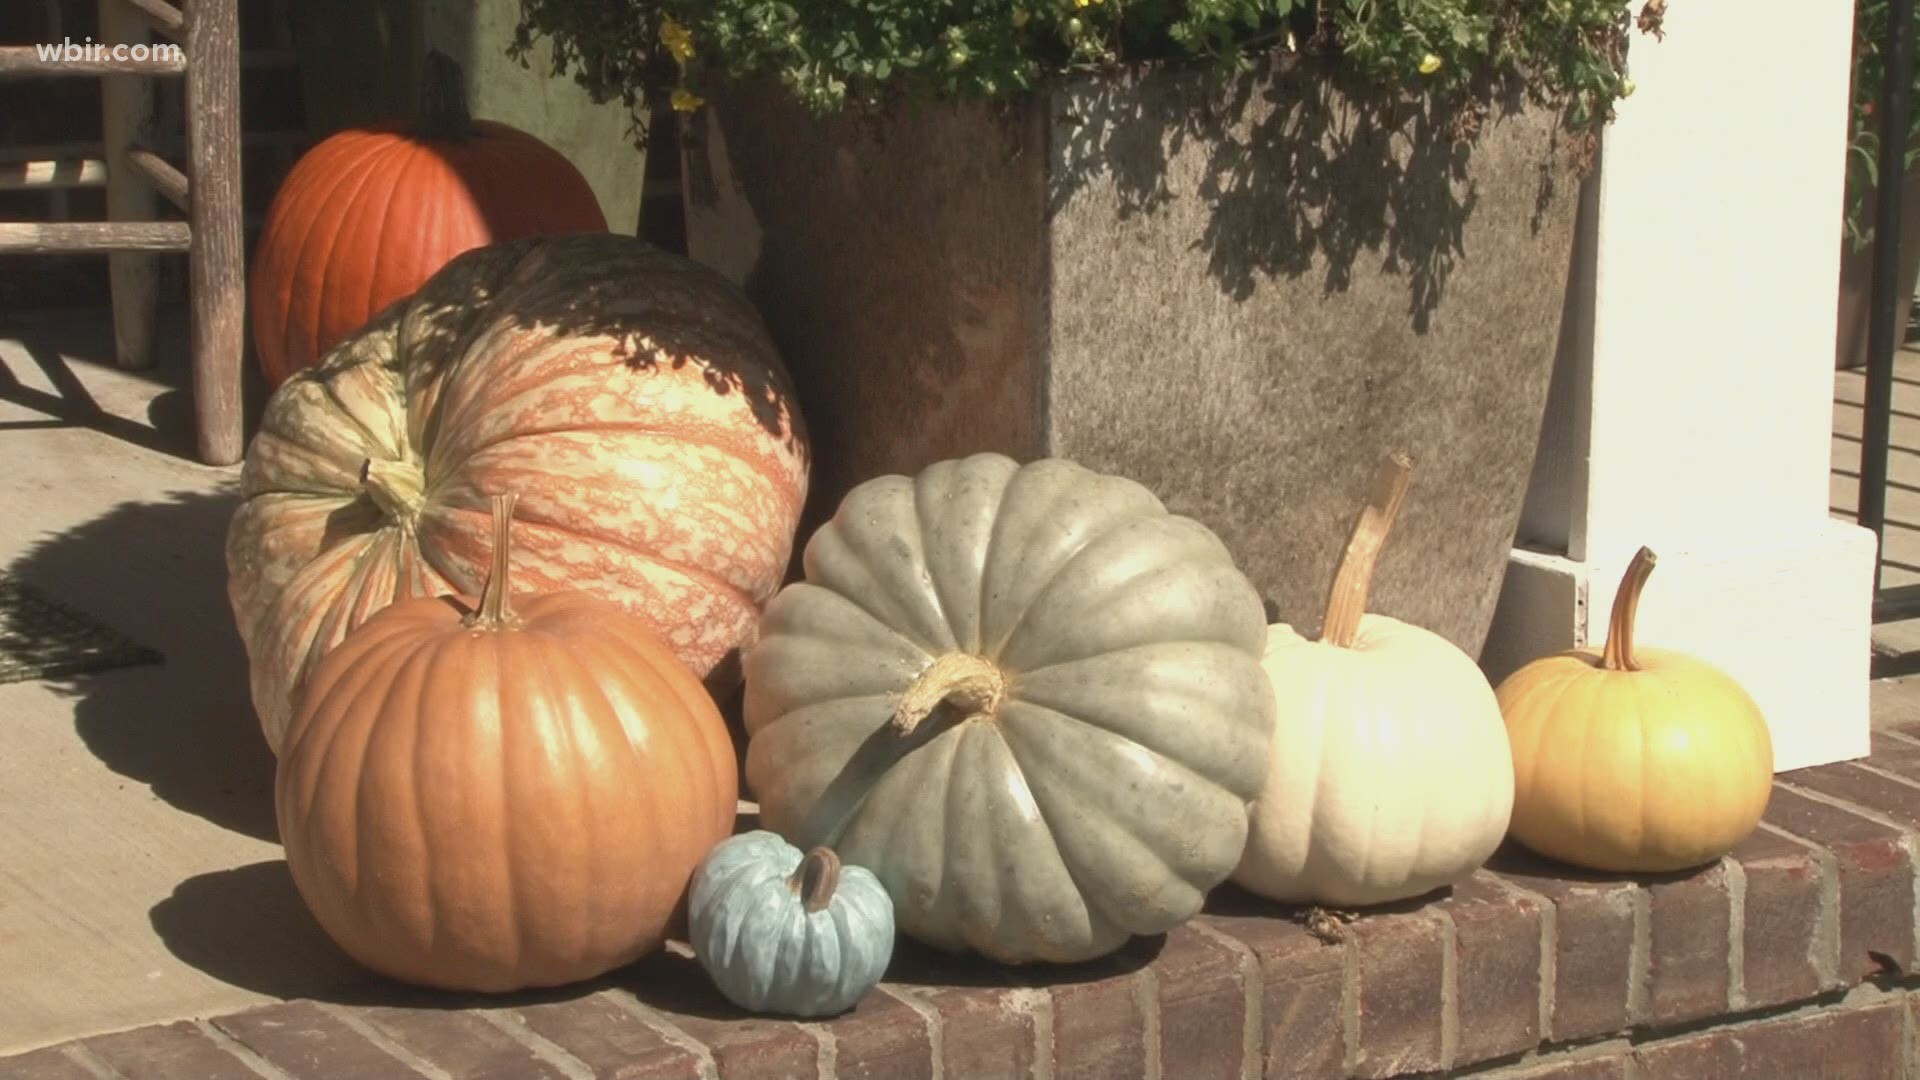 It's that time of year when people are grabbing pumpkins to take home!